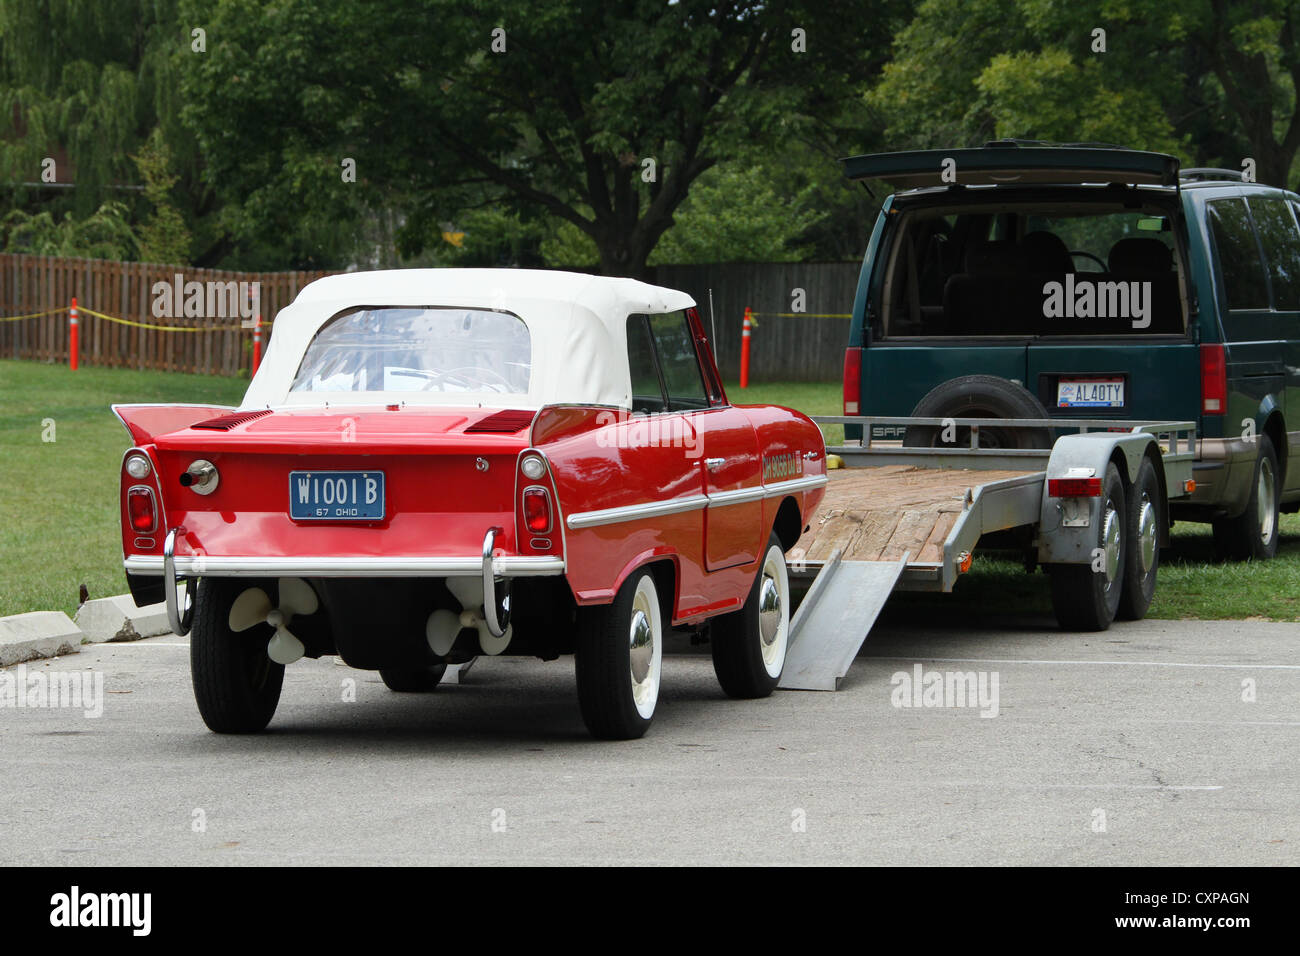 Auto- 1967 Amphicar. Red amphibious car that is also a boat. Ready to load on trailer. Stock Photo